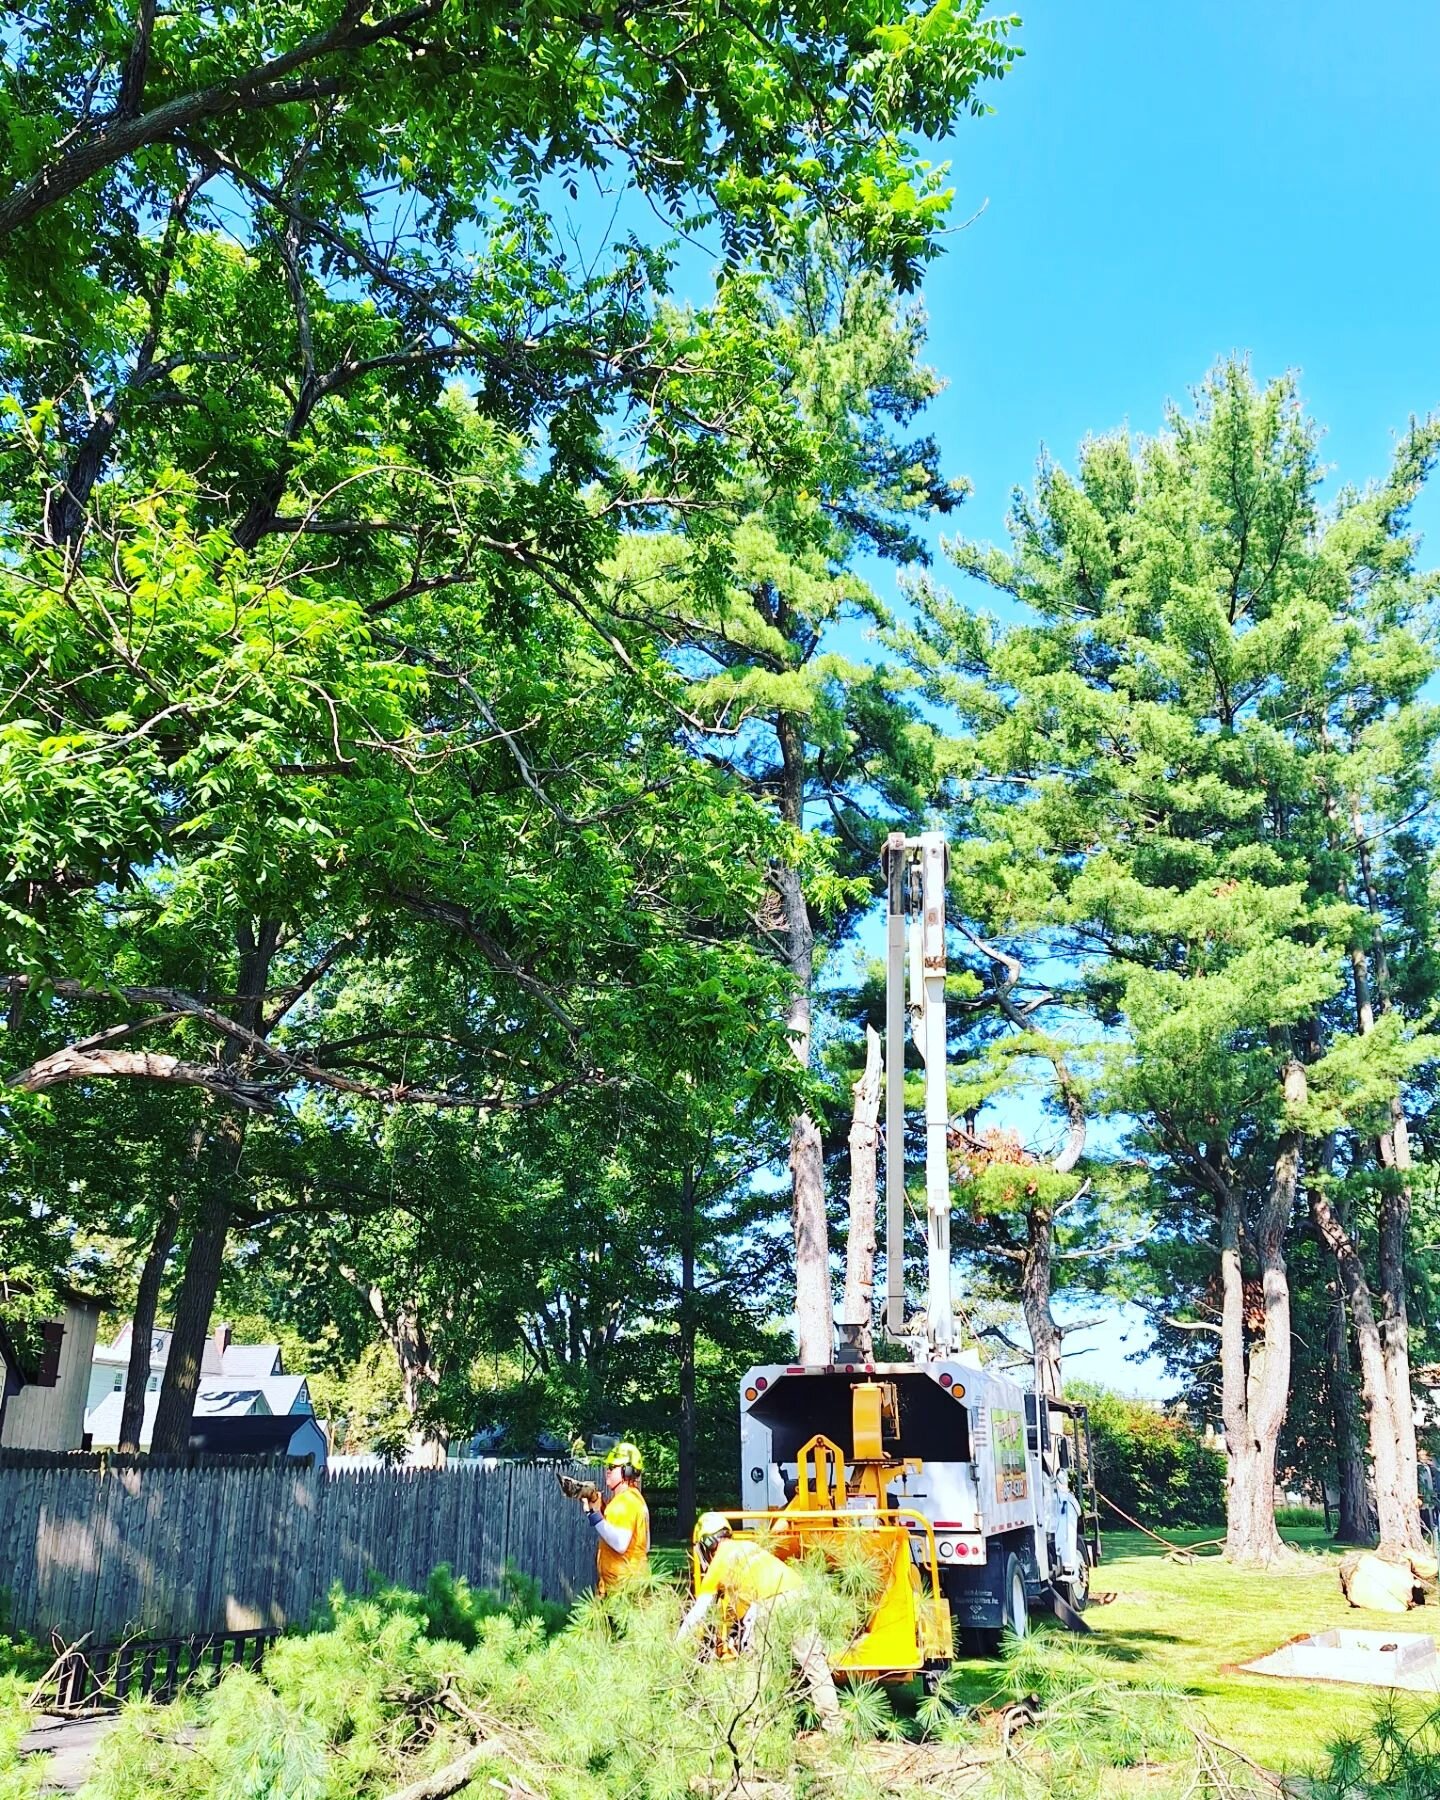 The team is busy at work this Thursday morning 🌳☀️

#treeremoval 
#TreeworksWNY 
#treetrimming